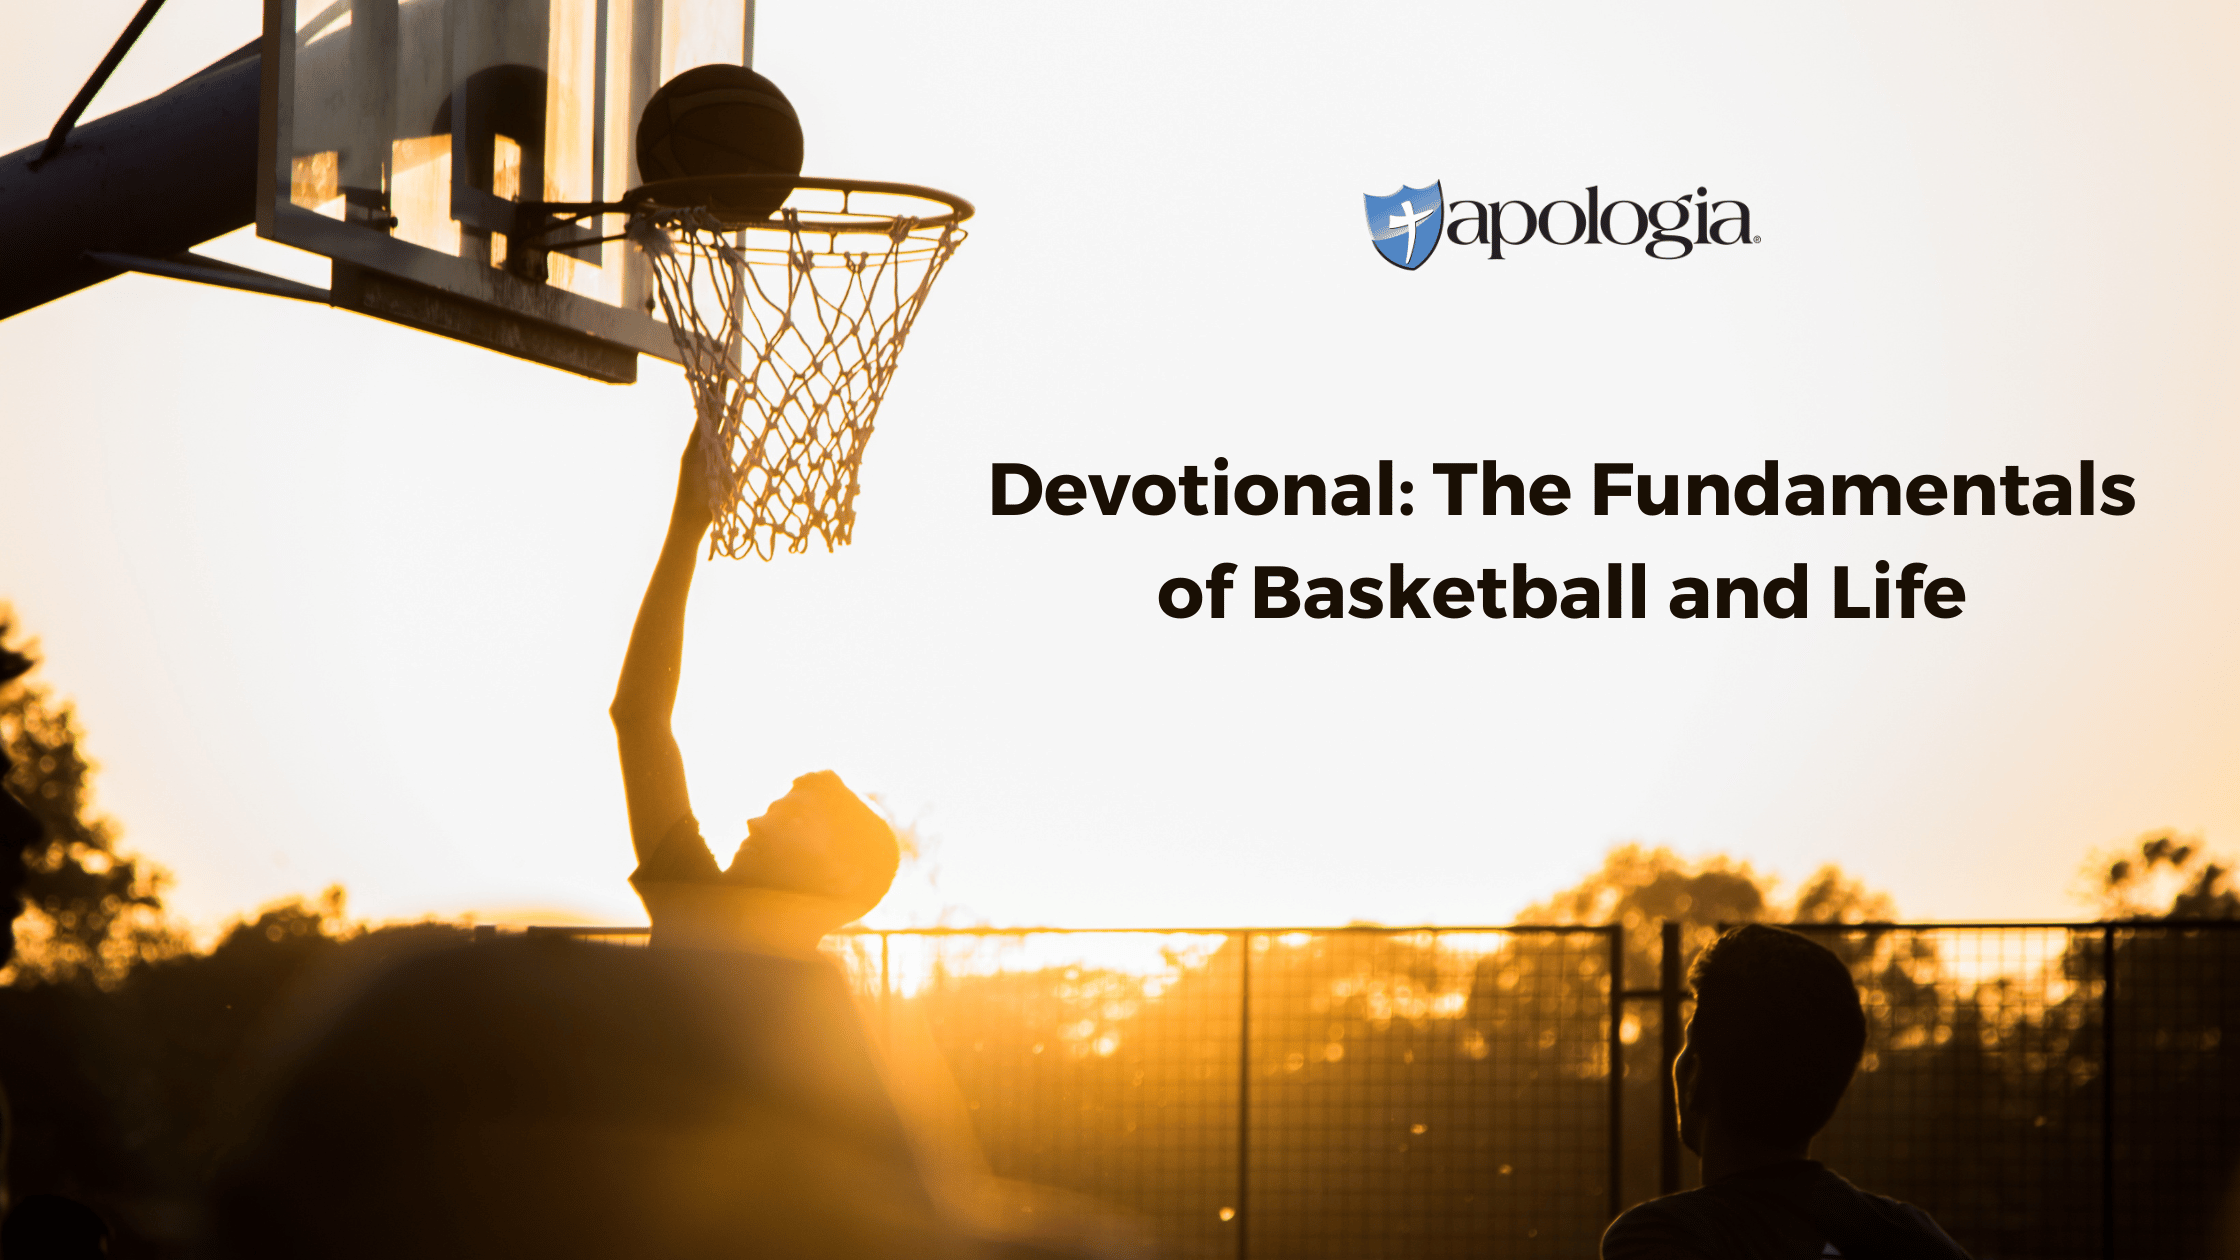 Devotional: The Fundamentals of Basketball and Life